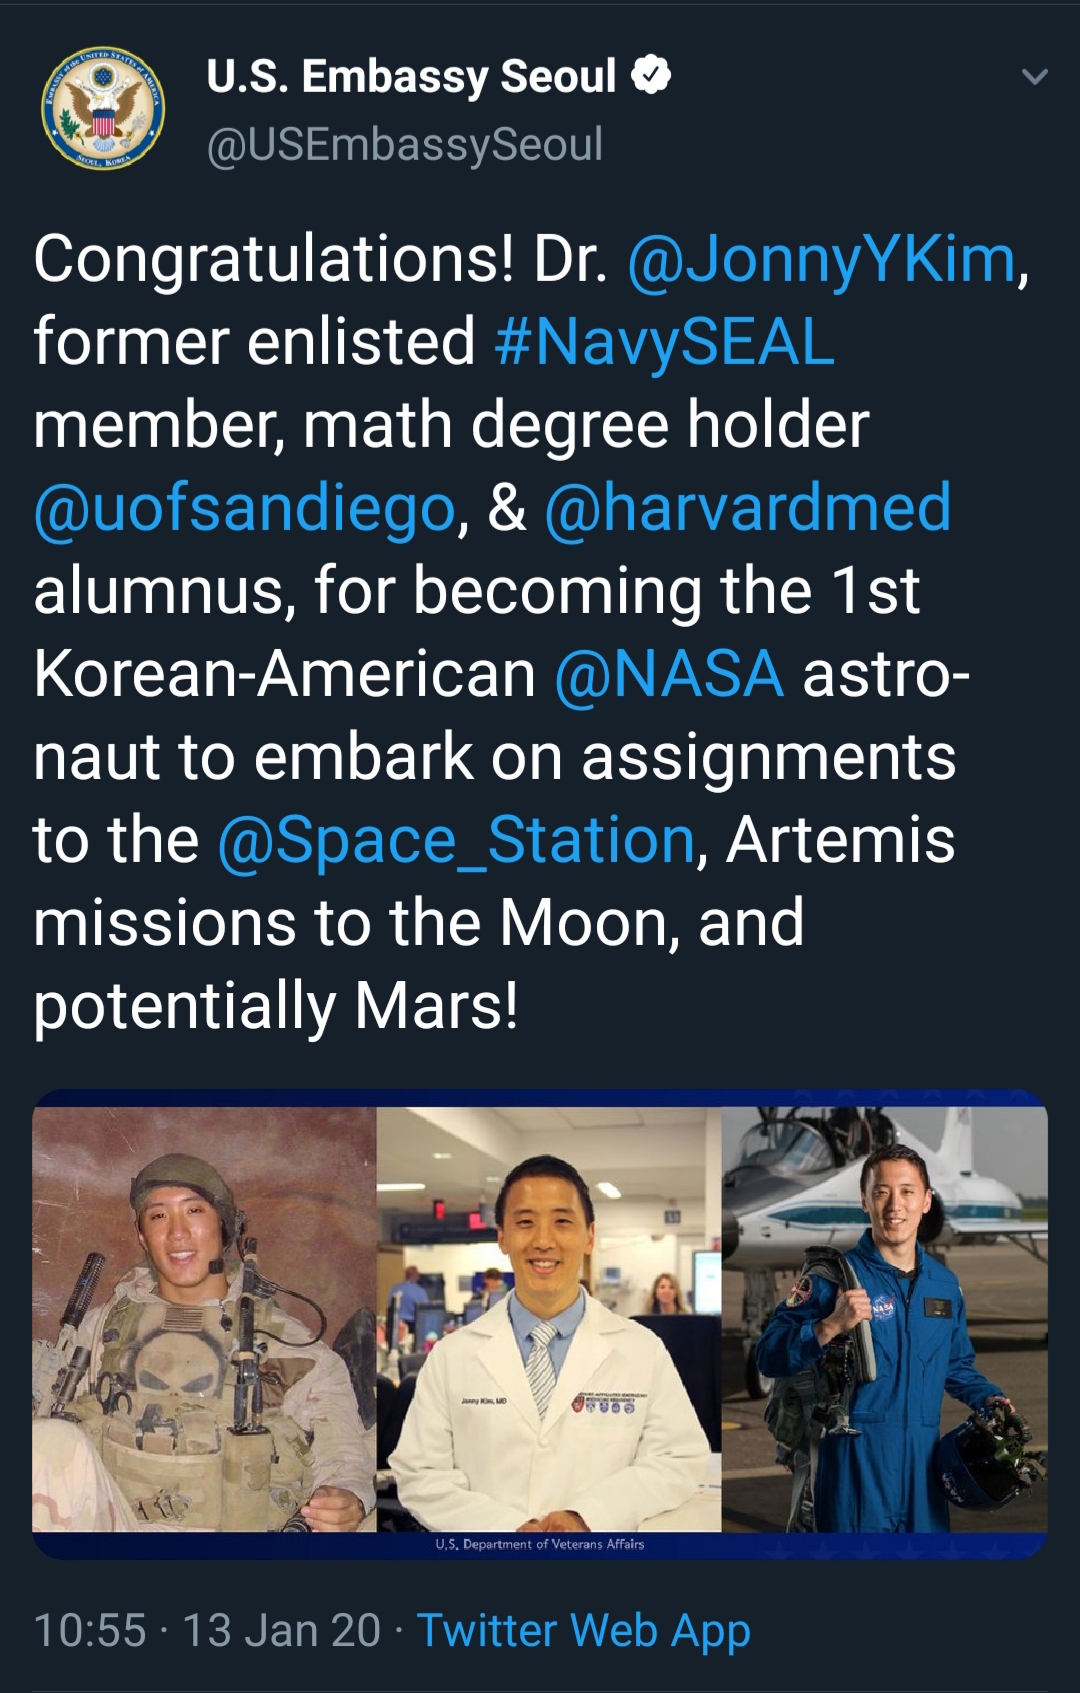 poster - U.S. Embassy Seoul Congratulations! Dr. Ykim, former enlisted Seal member, math degree holder , & alumnus, for becoming the 1st KoreanAmerican astro naut to embark on assignments to the , Artemis missions to the Moon, and potentially Mars! . 13 J